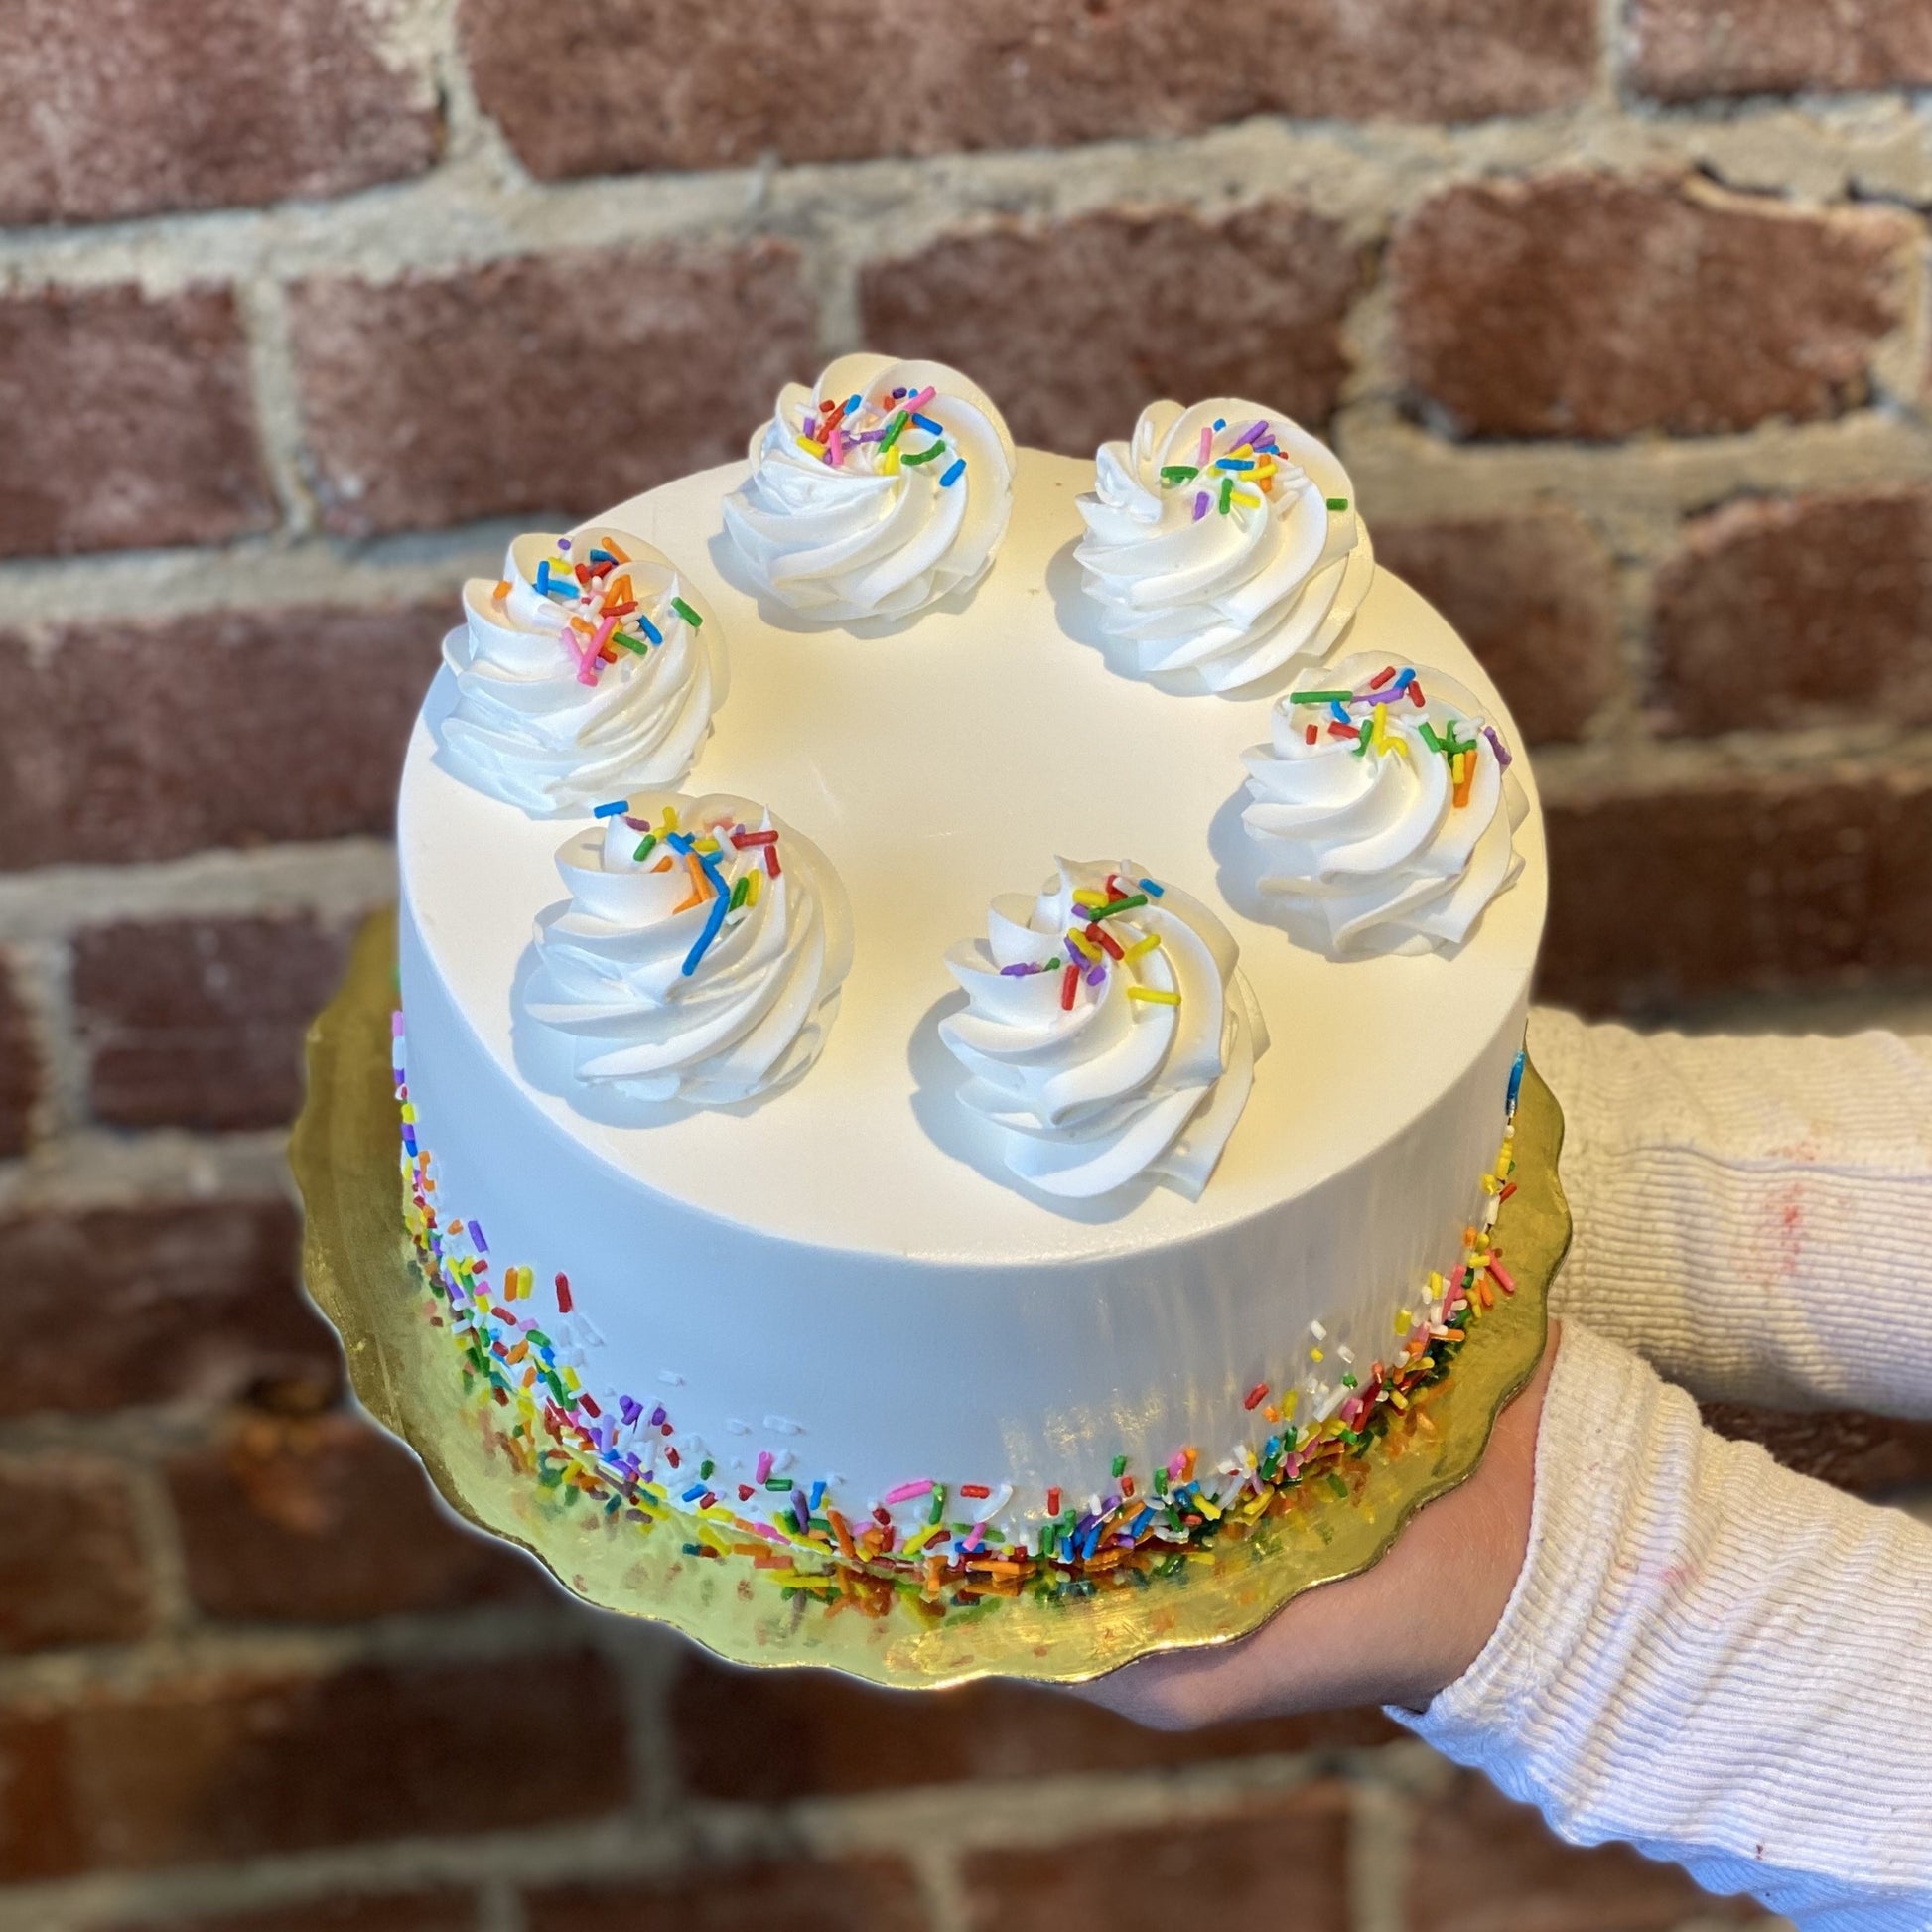 Vanilla cake with colourful sprinkles